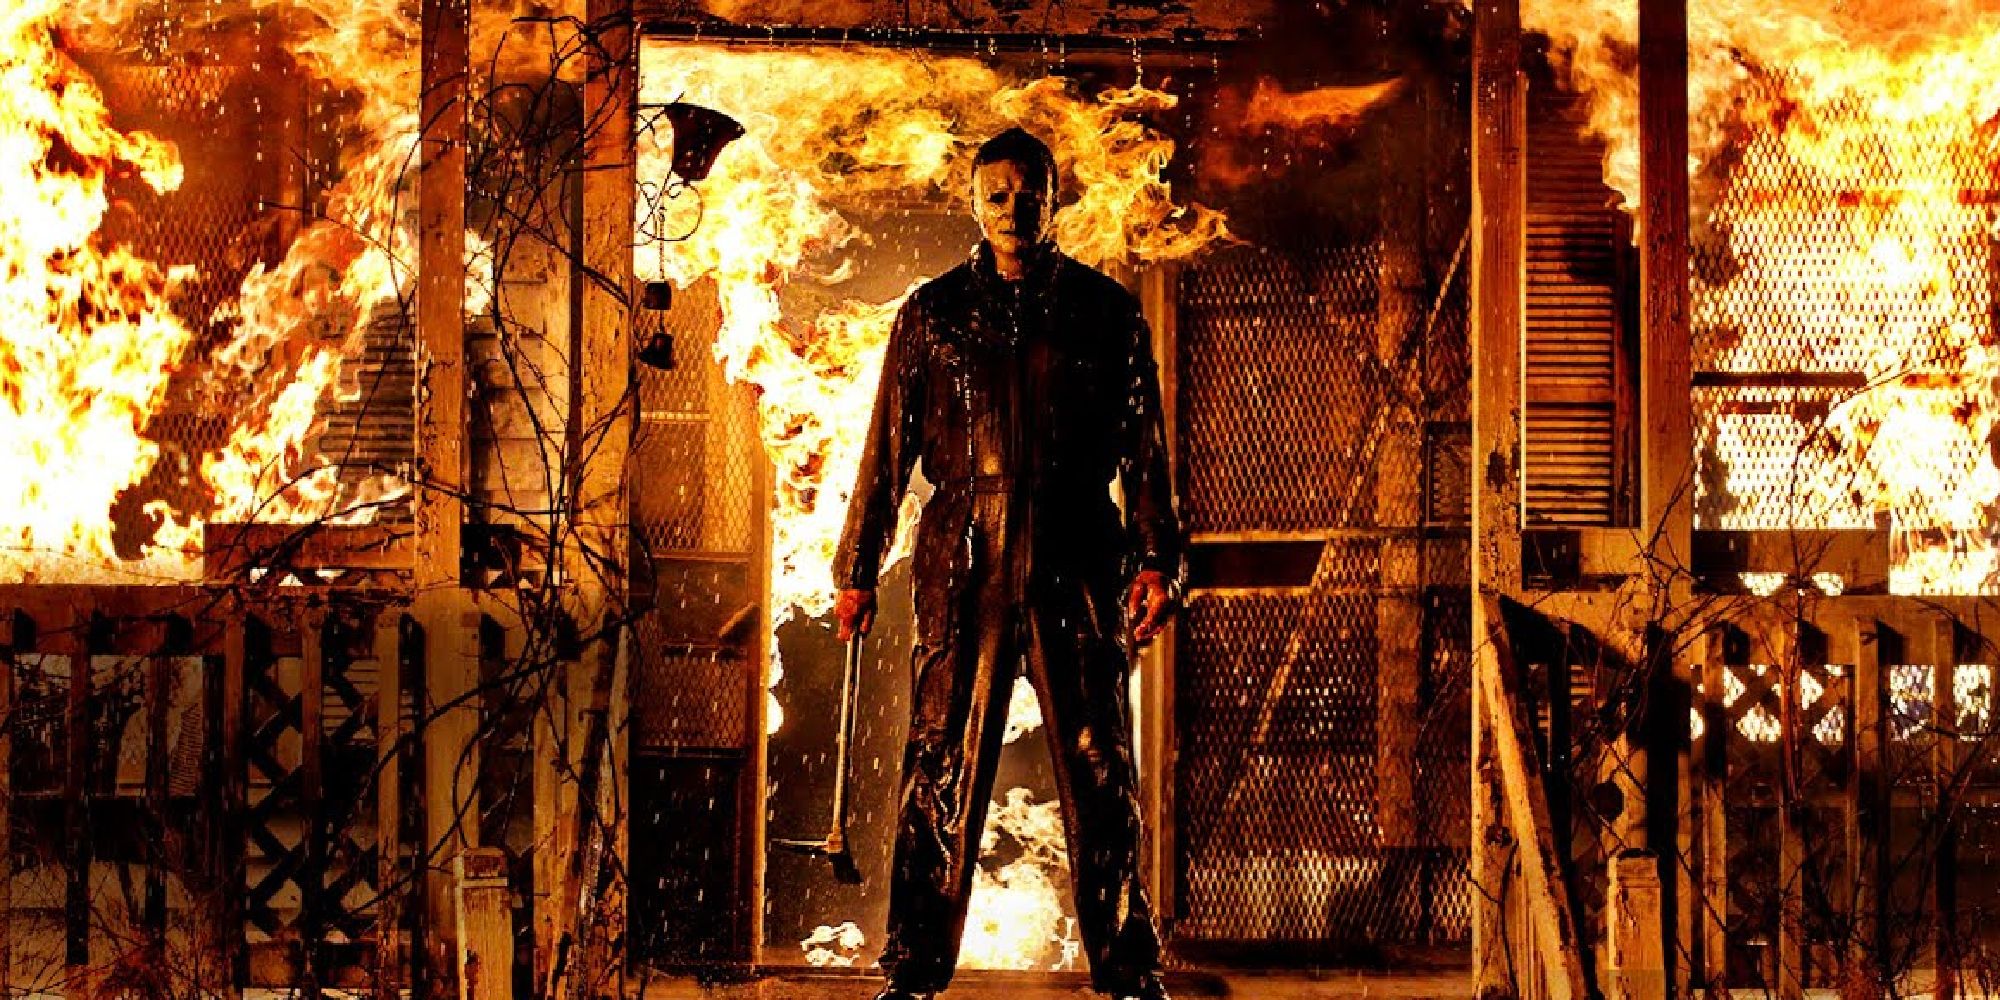 Michael Myers stands in front of a burning house in Halloween Kills